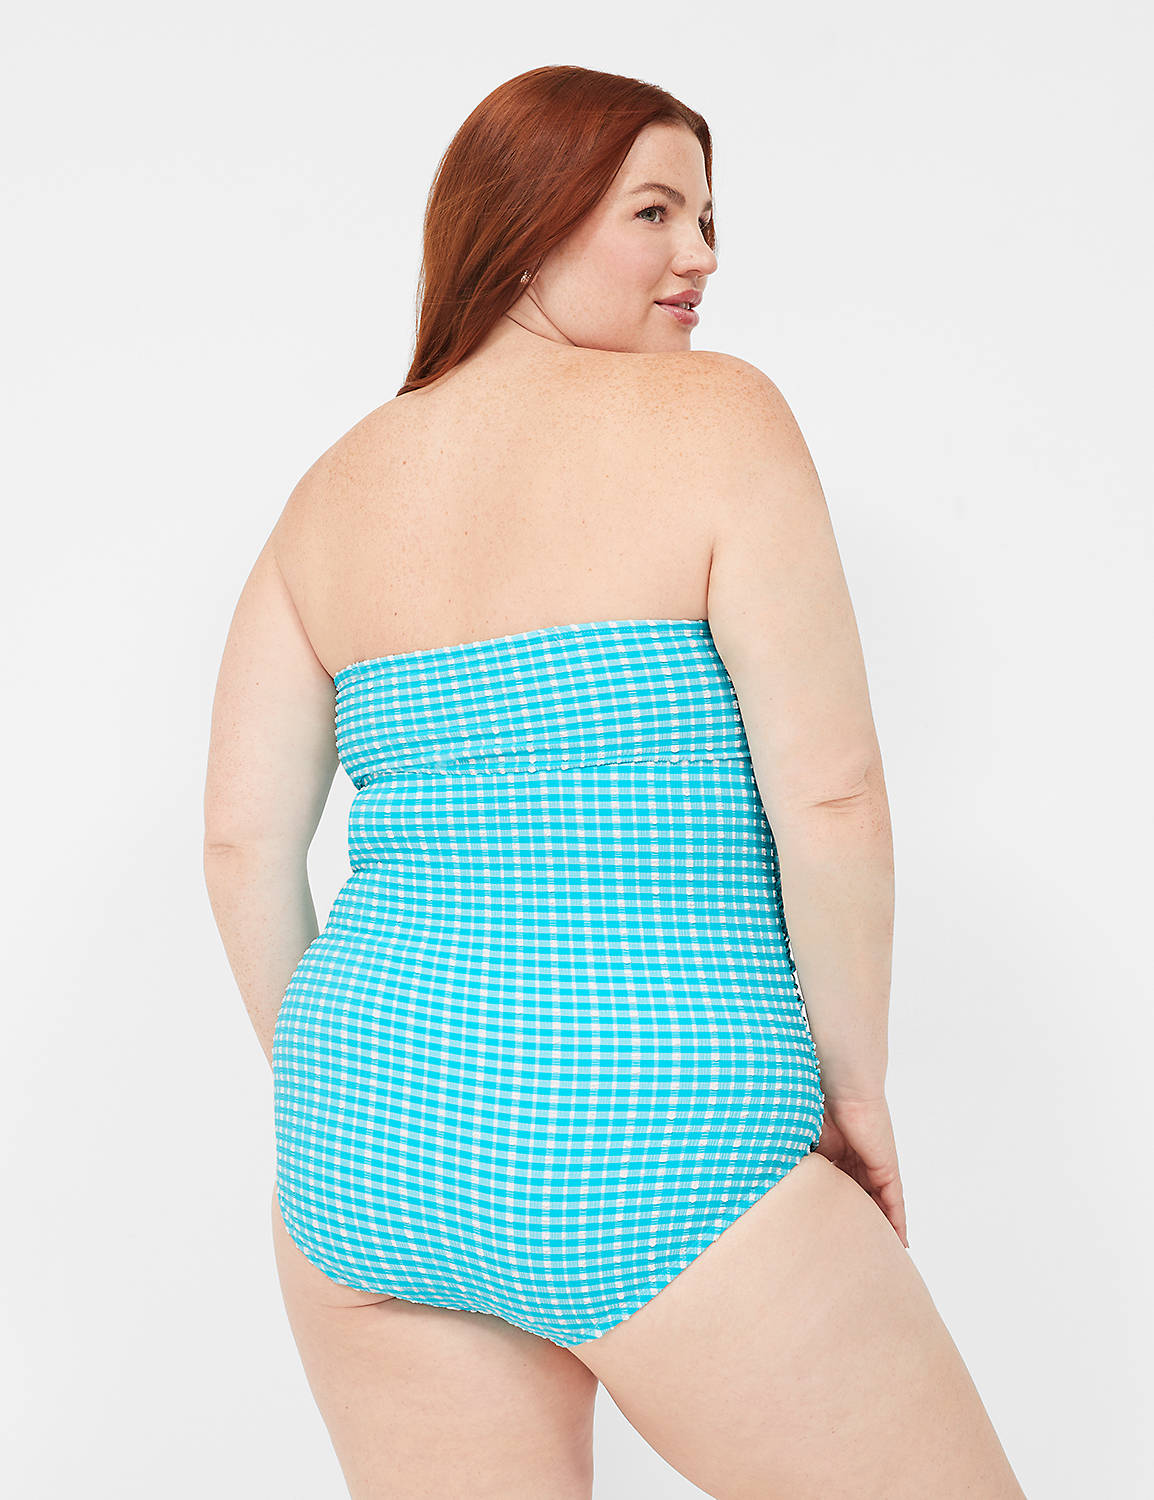 Gingham Strapless NW Brief One Piec Product Image 2